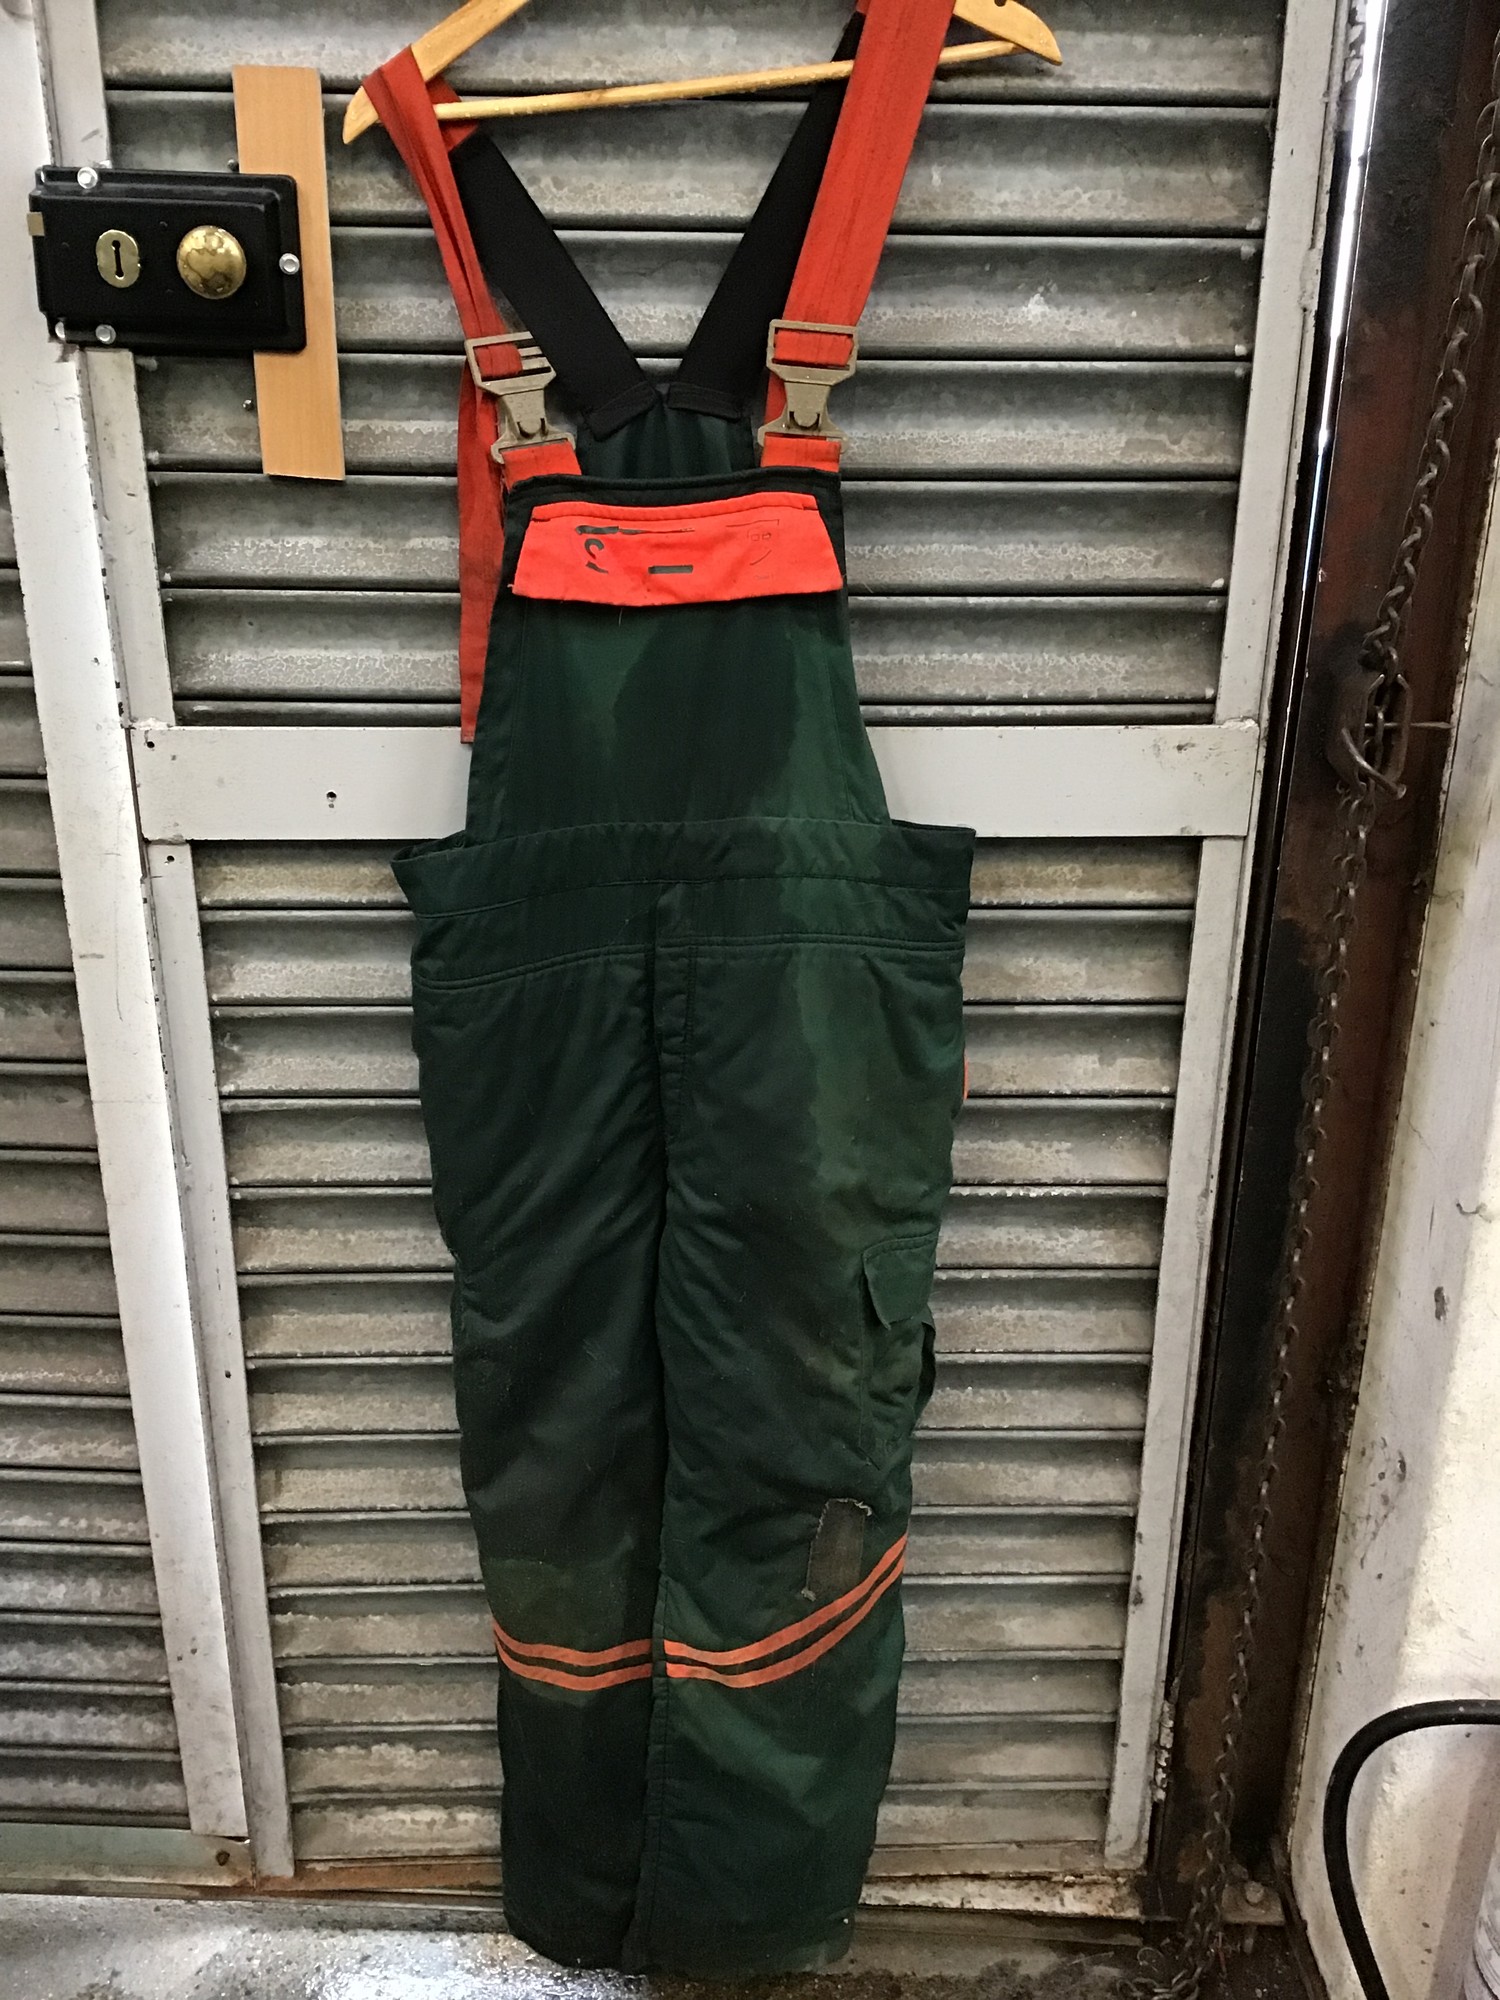 Pressure Washer, Stihl Petrol Chainsaw and men?s Workwear - Image 2 of 2